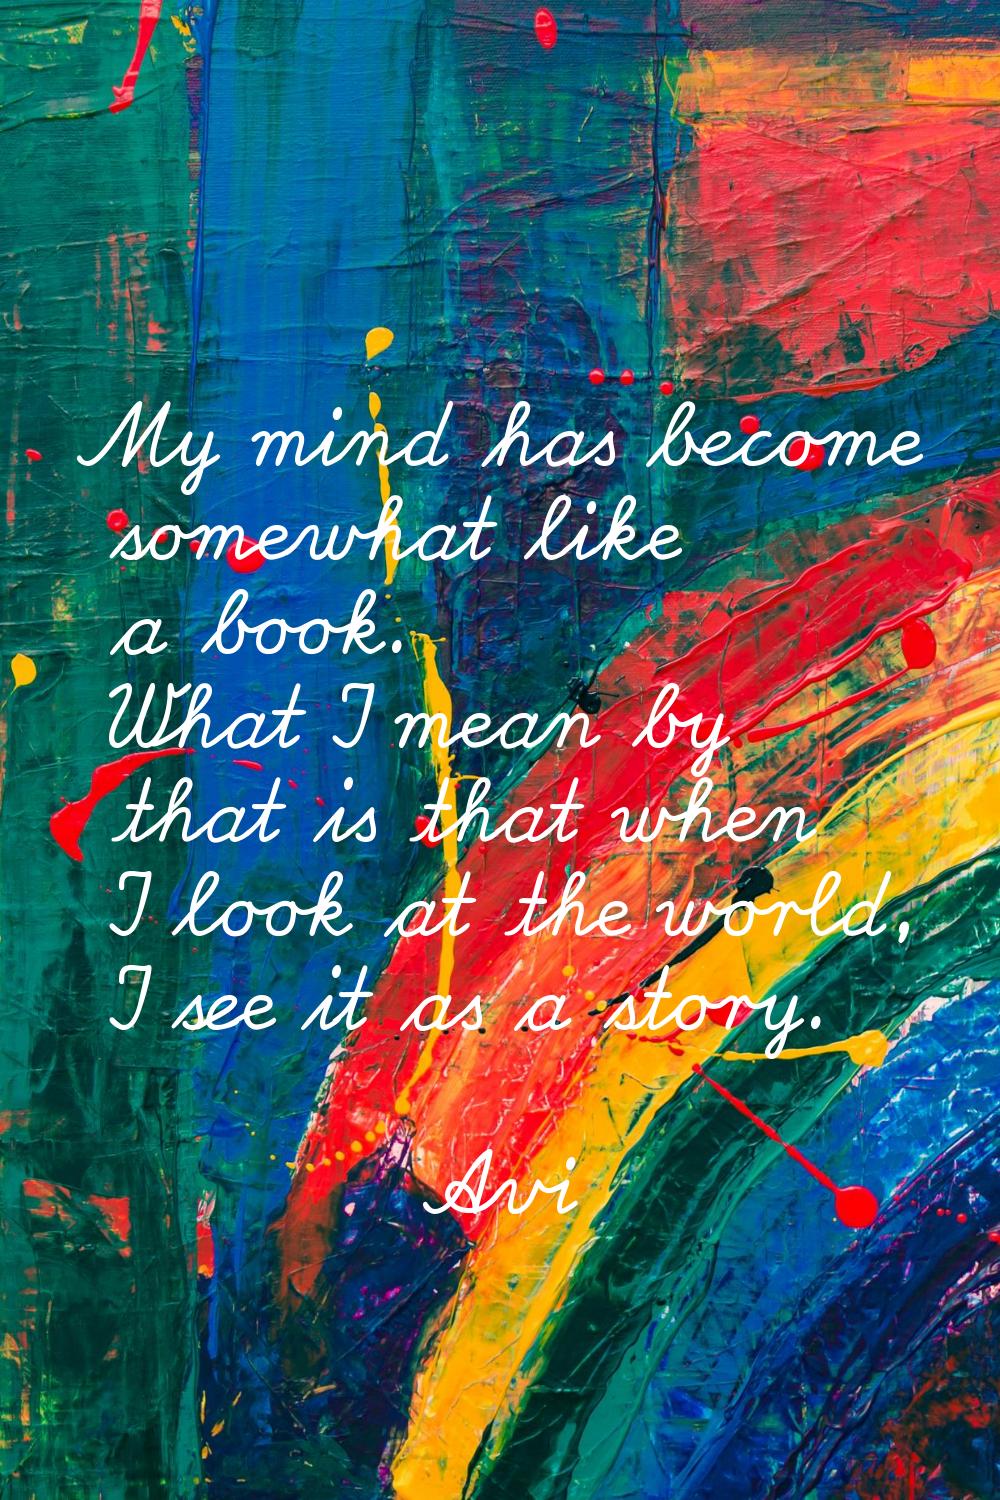 My mind has become somewhat like a book. What I mean by that is that when I look at the world, I se